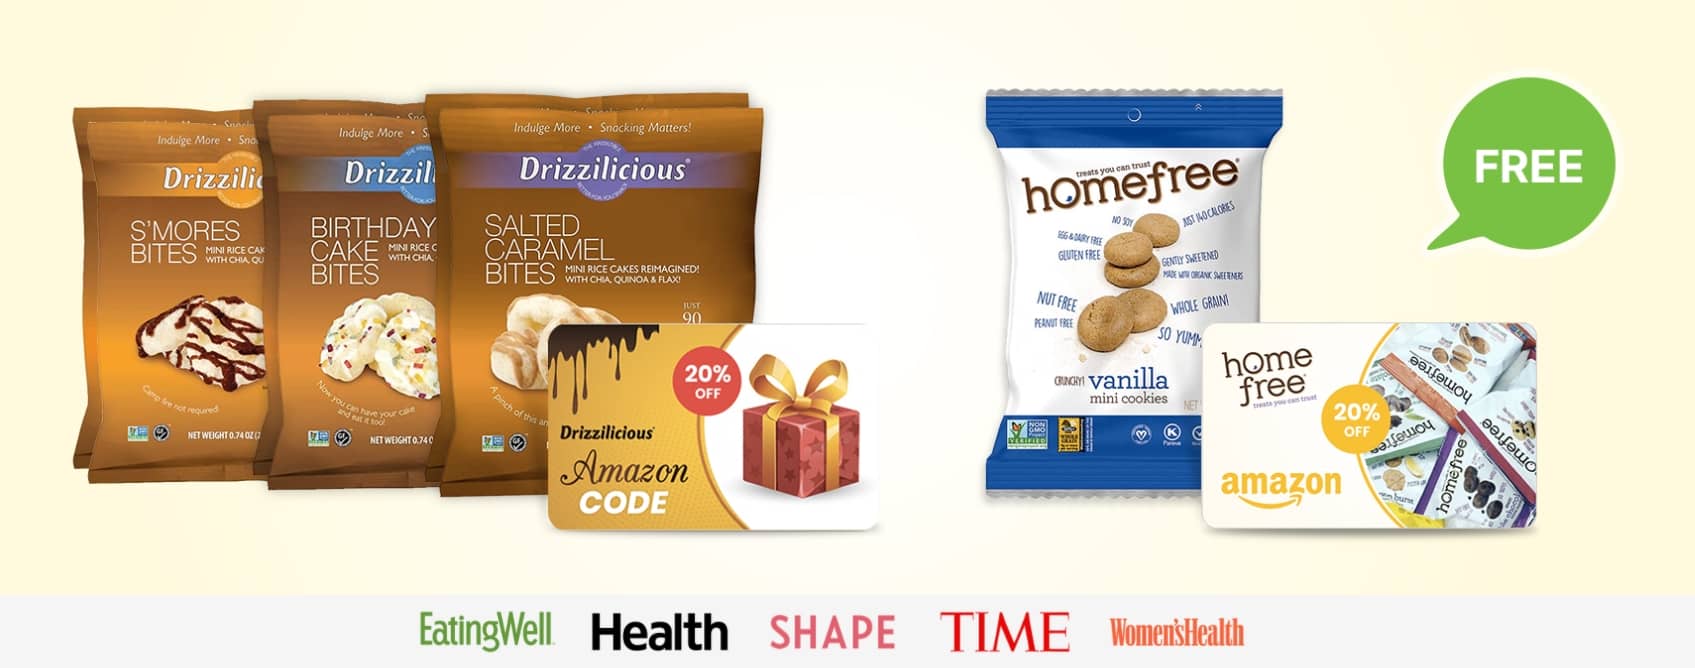 Drizzilicious Rice Cake Bites Homefree Wholesome Cookies FREE closetsamples